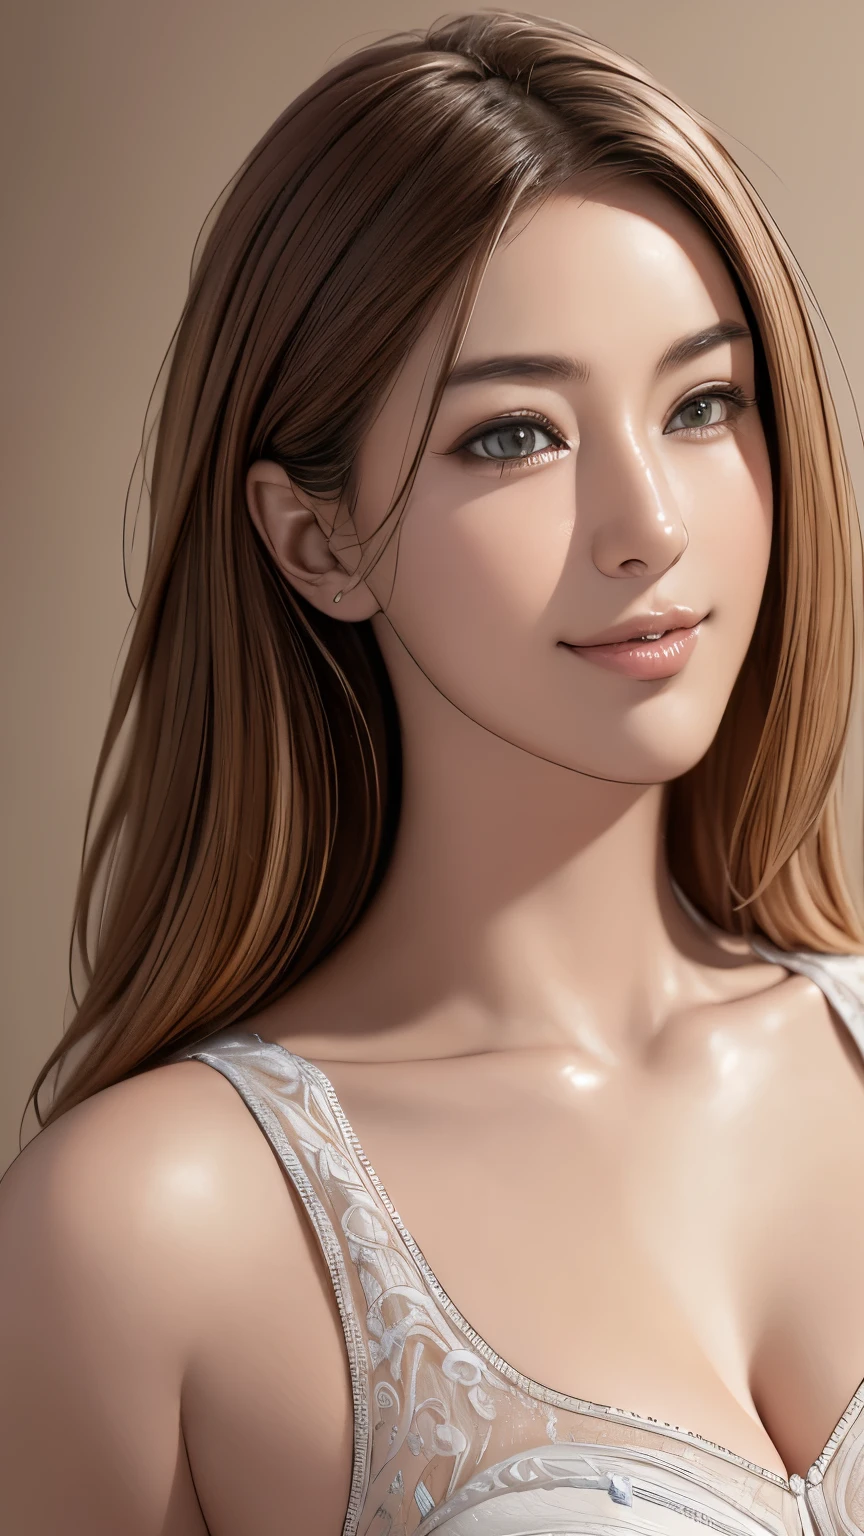 "Enhance quality and detail、create great work, A masterpiece of high-resolution CG that expresses ultra-realistic textures and detailed designs.."
(Prompt 1: "Enhance quality and detail，Create stunning high-resolution CG masterpieces，Features ultra-realistic texture and sophisticated design。")、smile with your mouth closed